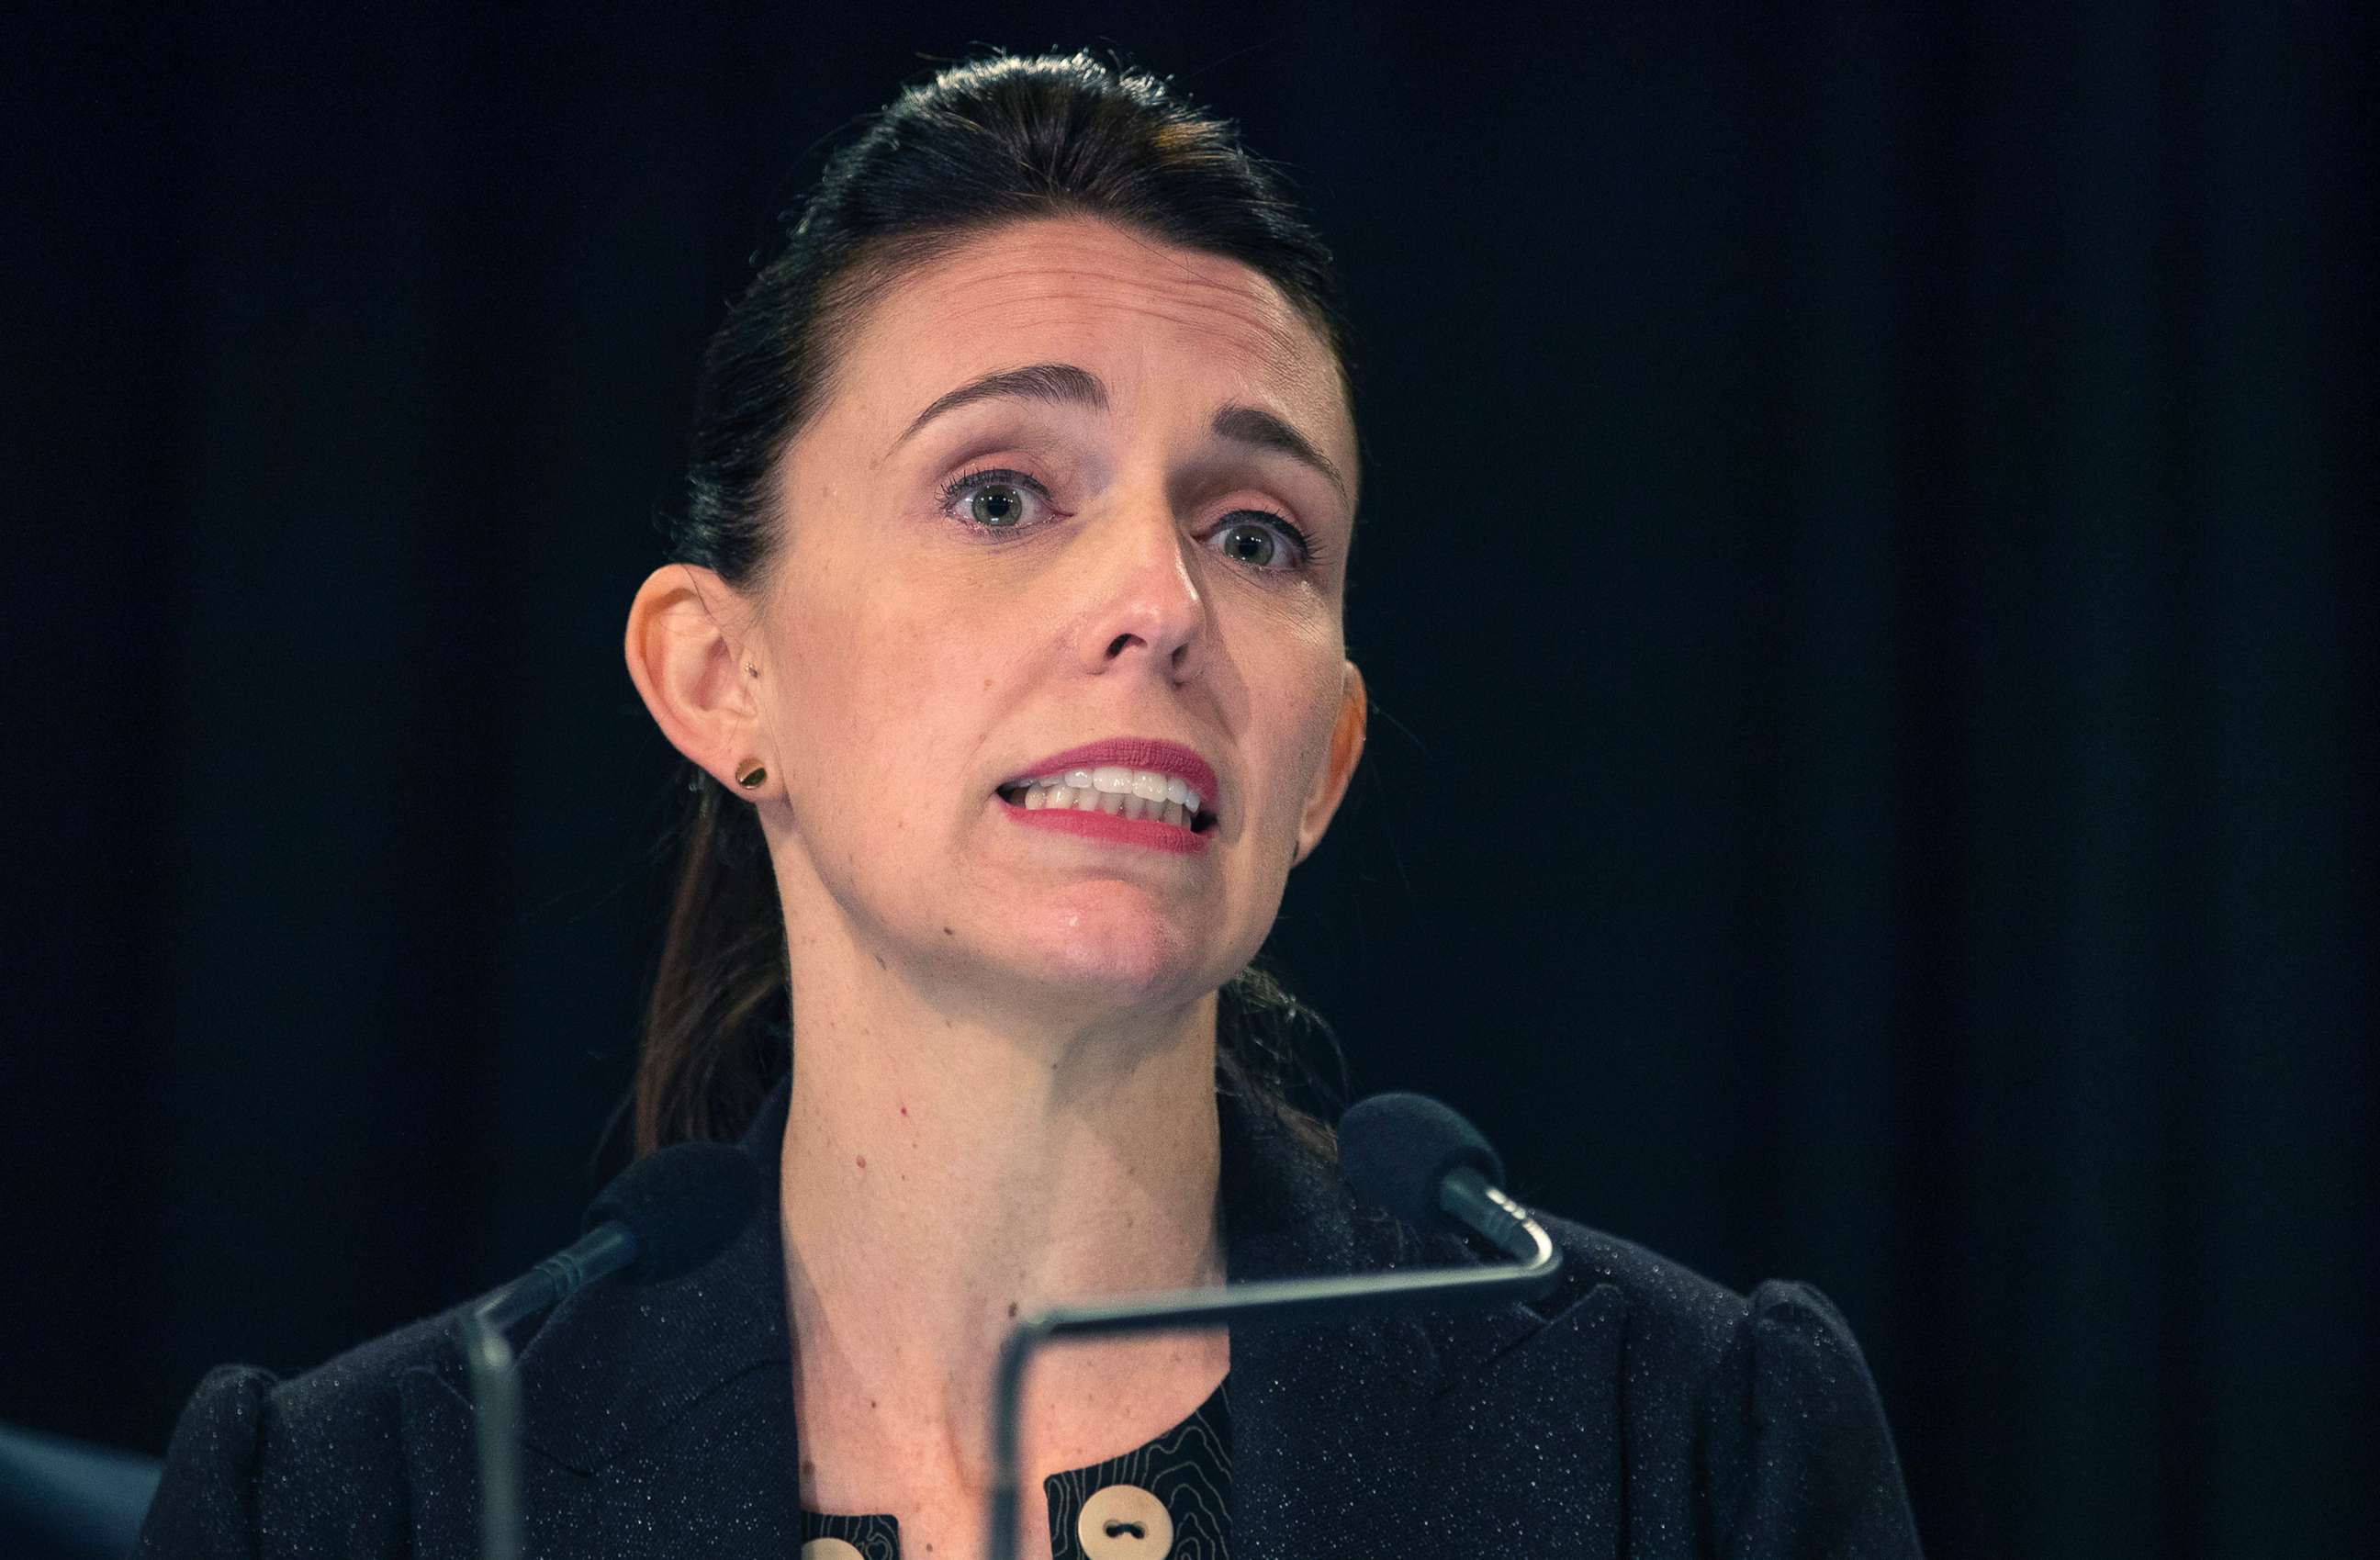 PHOTO: New Zealand Prime Minister Jacinda Ardern speaks at a press conference about murdered British tourist Grace Millane during her weekly post-Cabinet press conference in Wellington, New Zealand, Dec. 10, 2018.